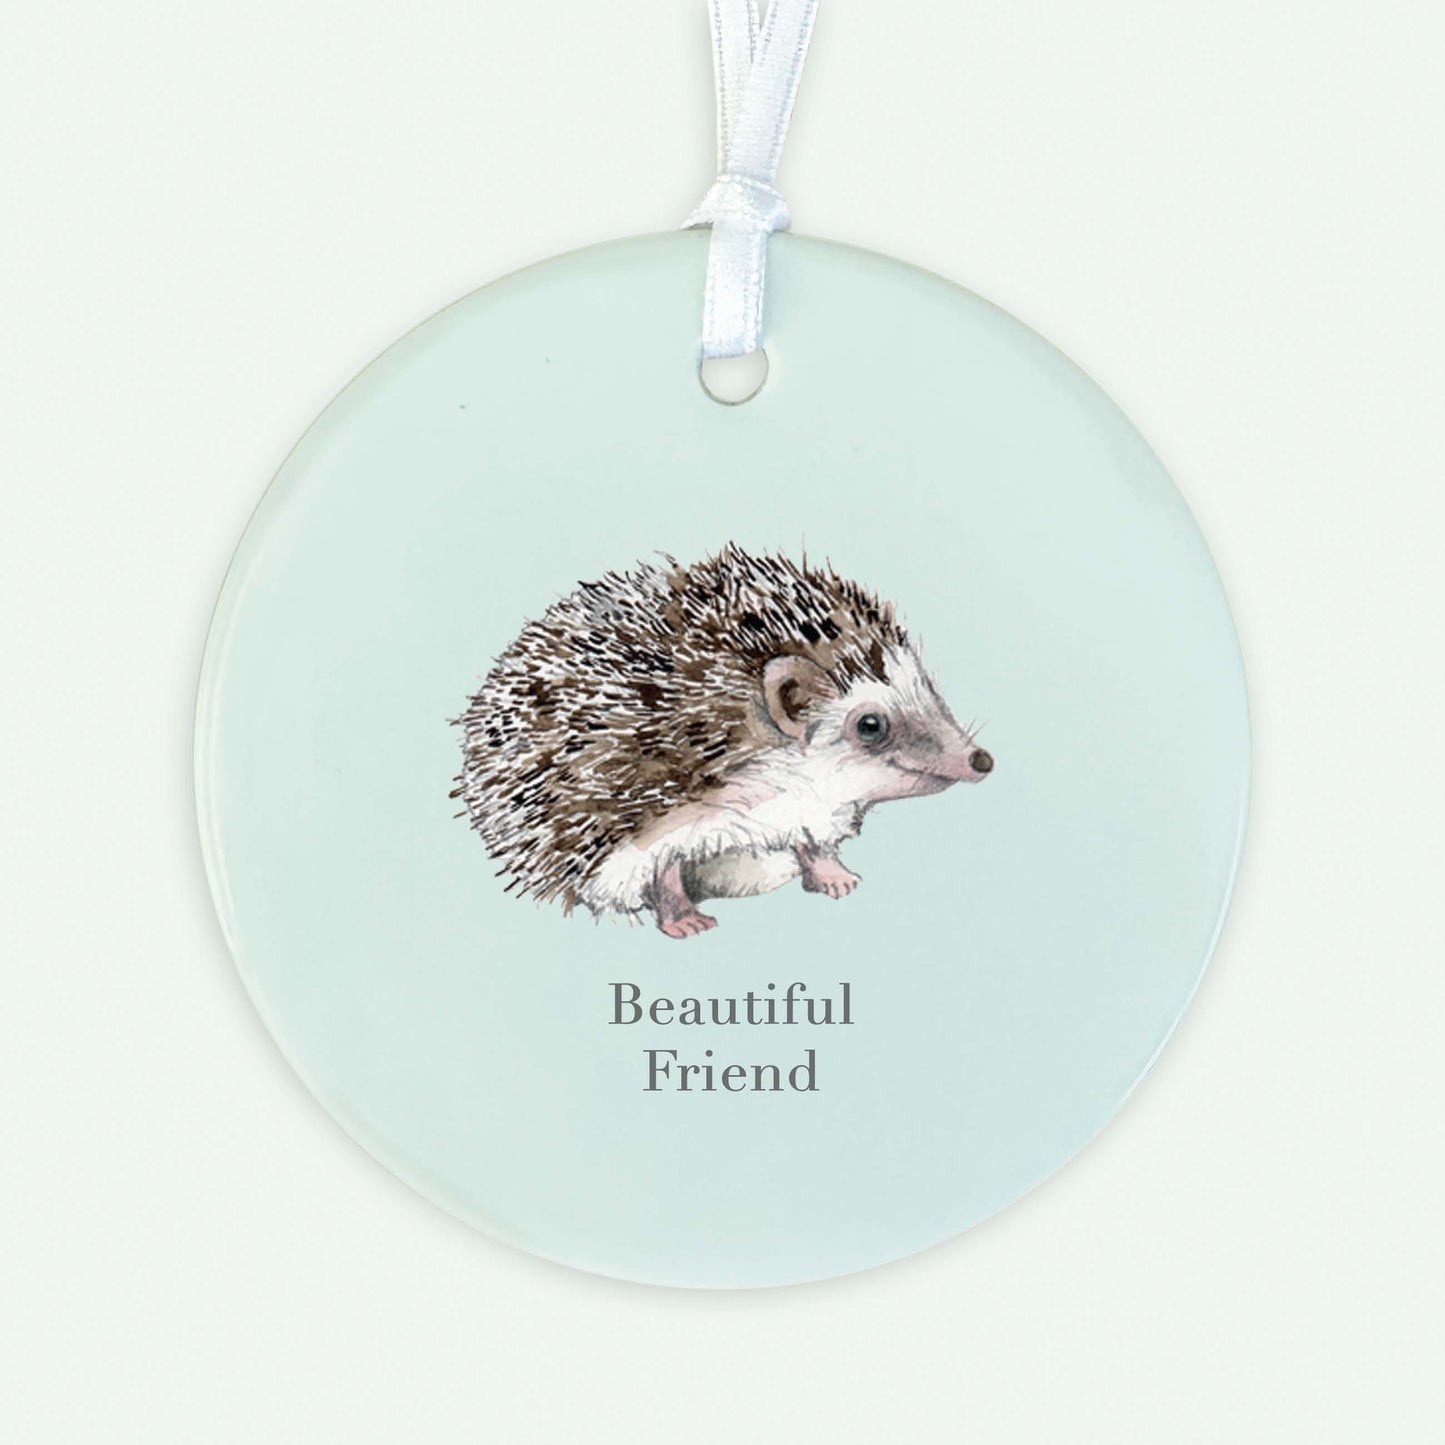 A6 Greeting Card with Ceramic Keepsake - Hedgehog Beautiful Friend Greeting & Note Cards Crumble and Core   